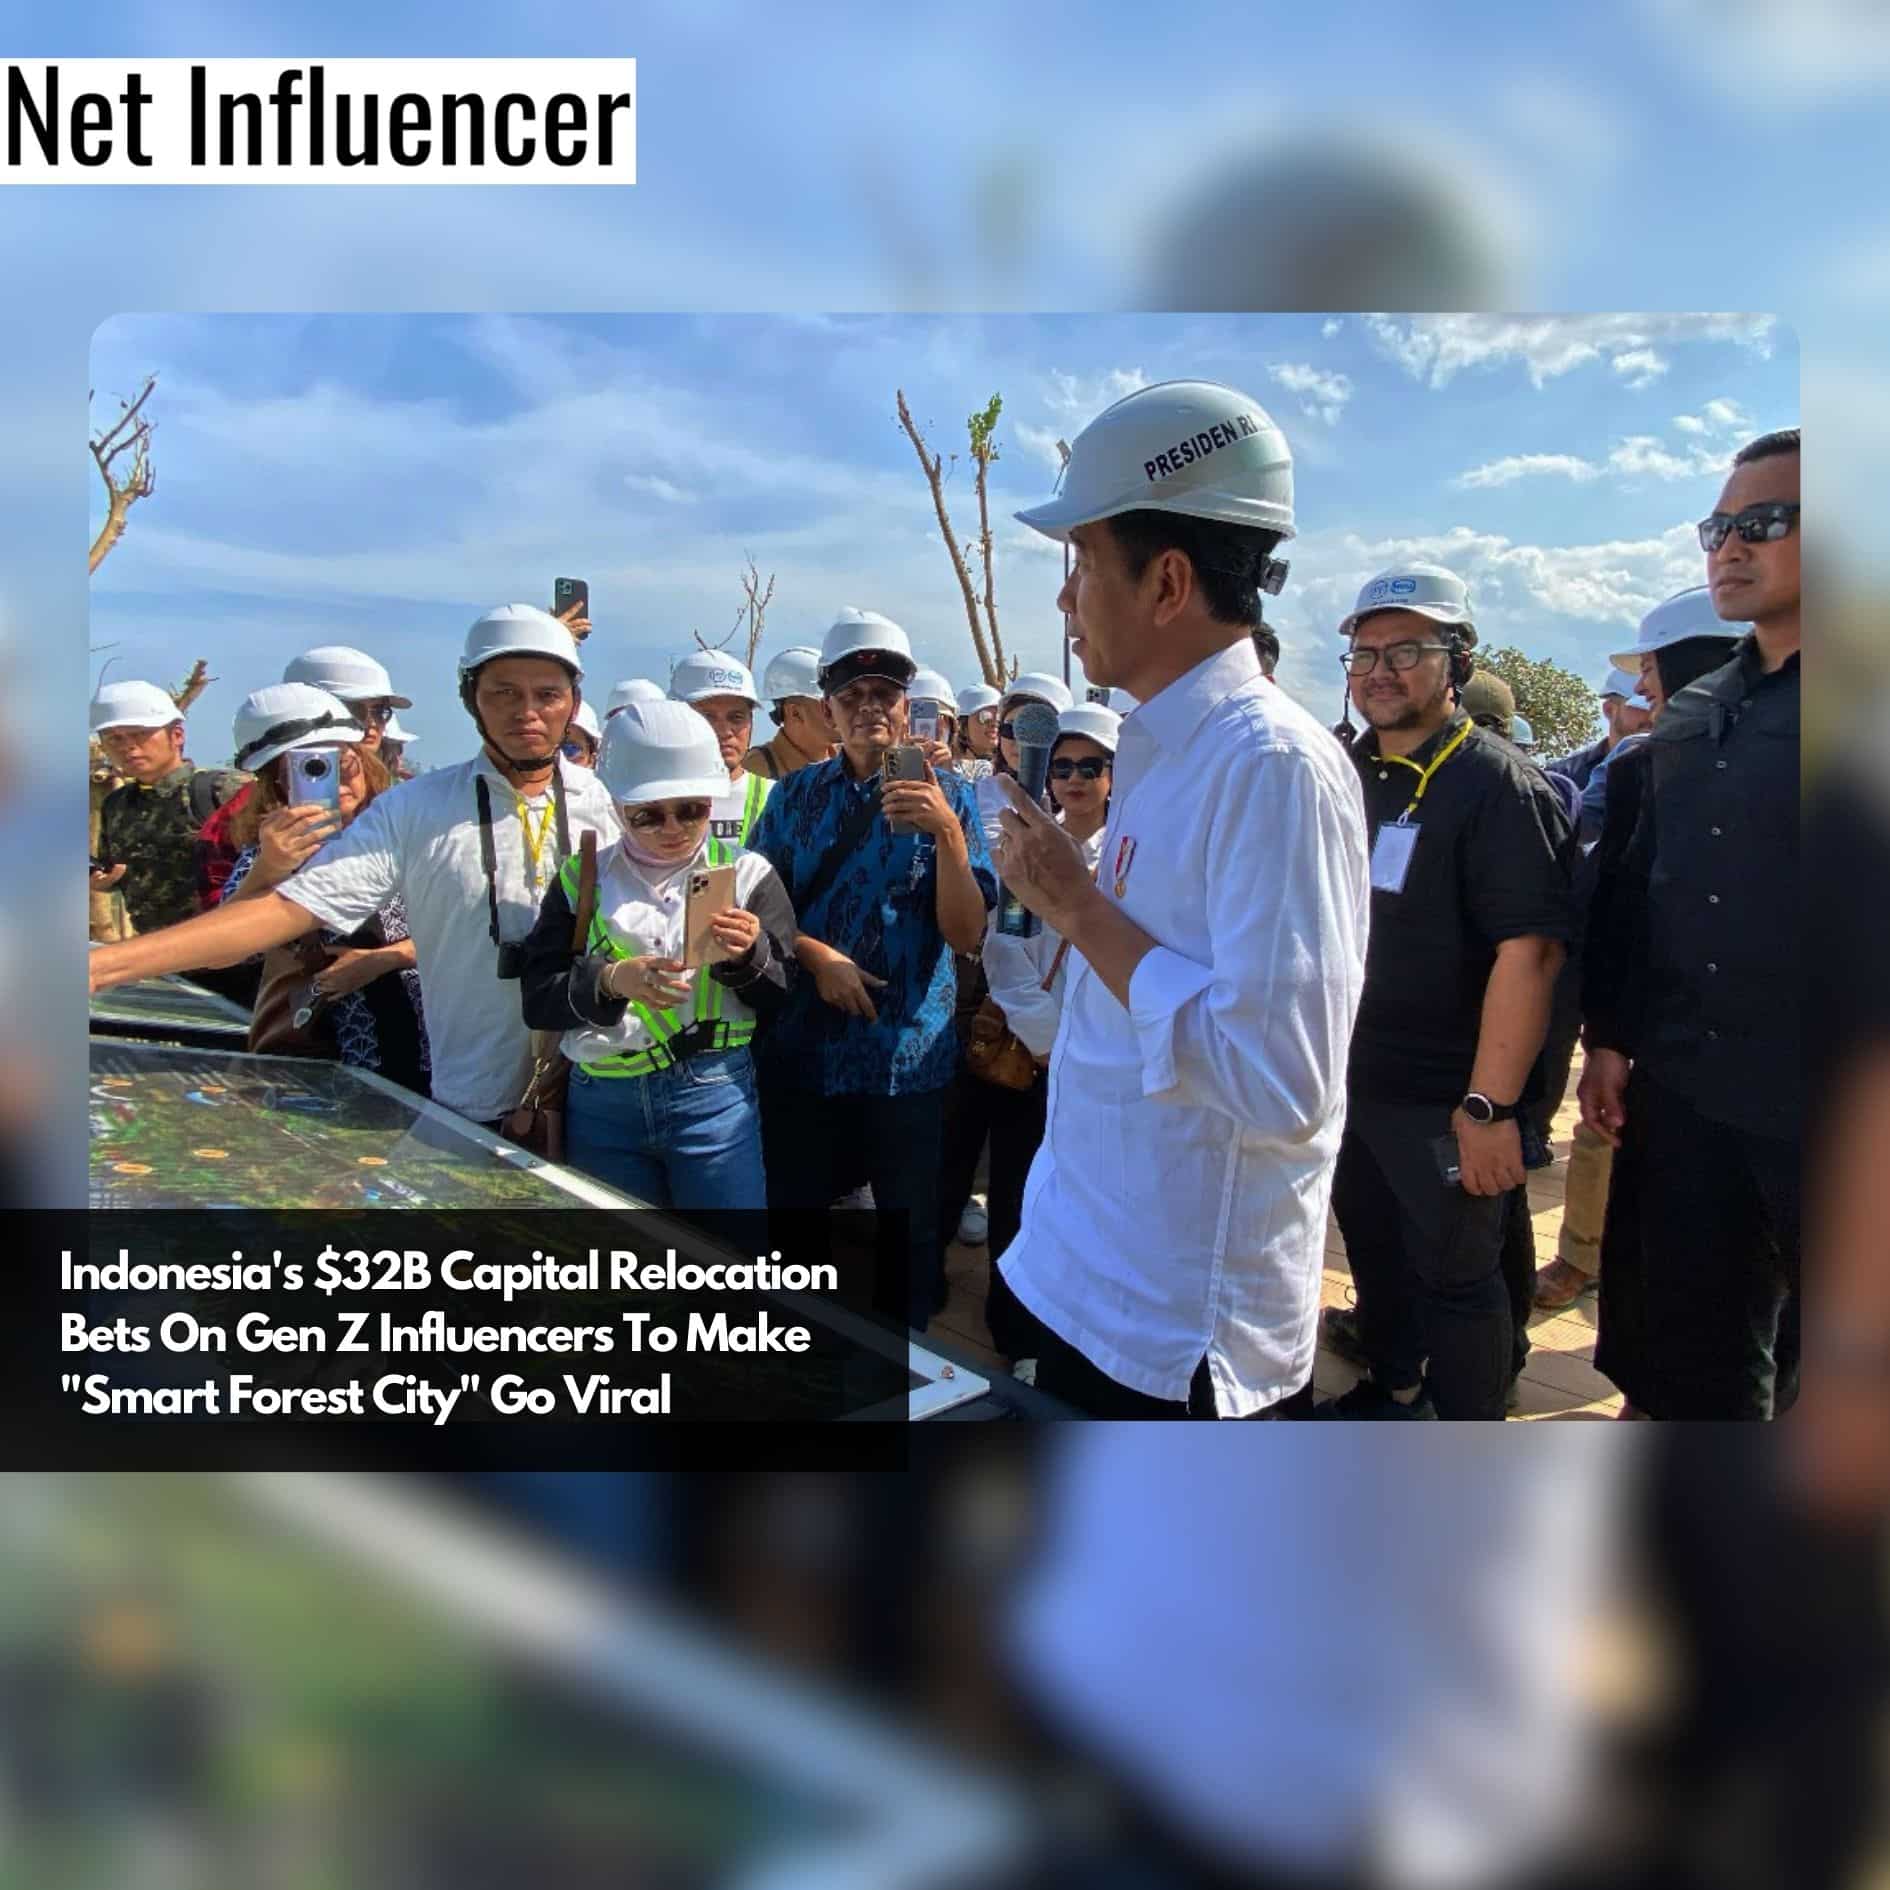 Indonesia's $32B Capital Relocation Bets On Gen Z Influencers To Make Smart Forest City Go Viral